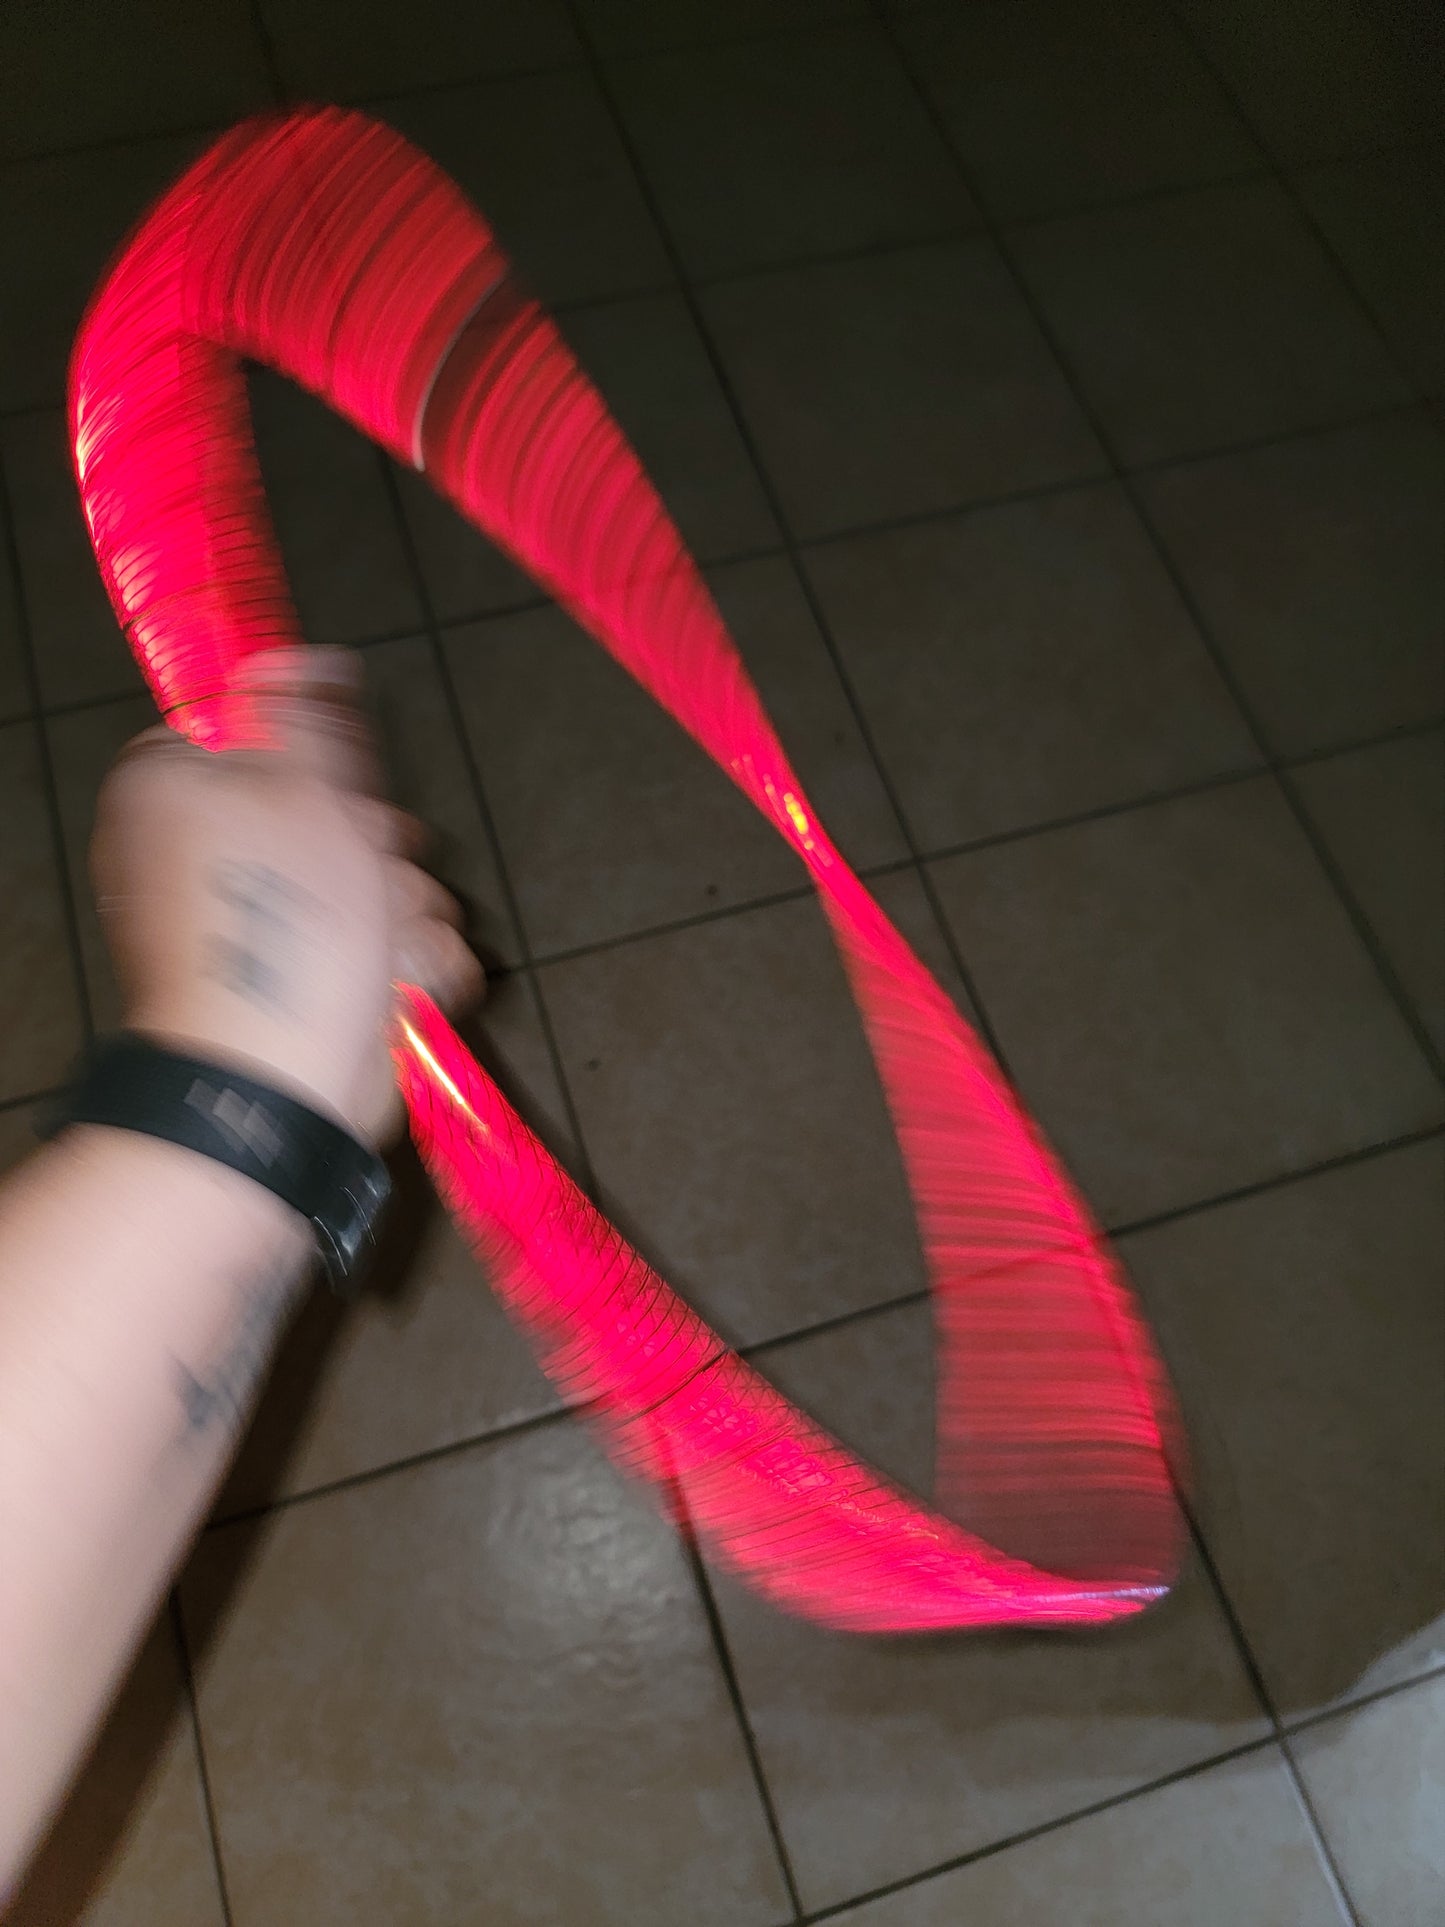 Dragons Blood Reflective Color Morph Taped Hoop